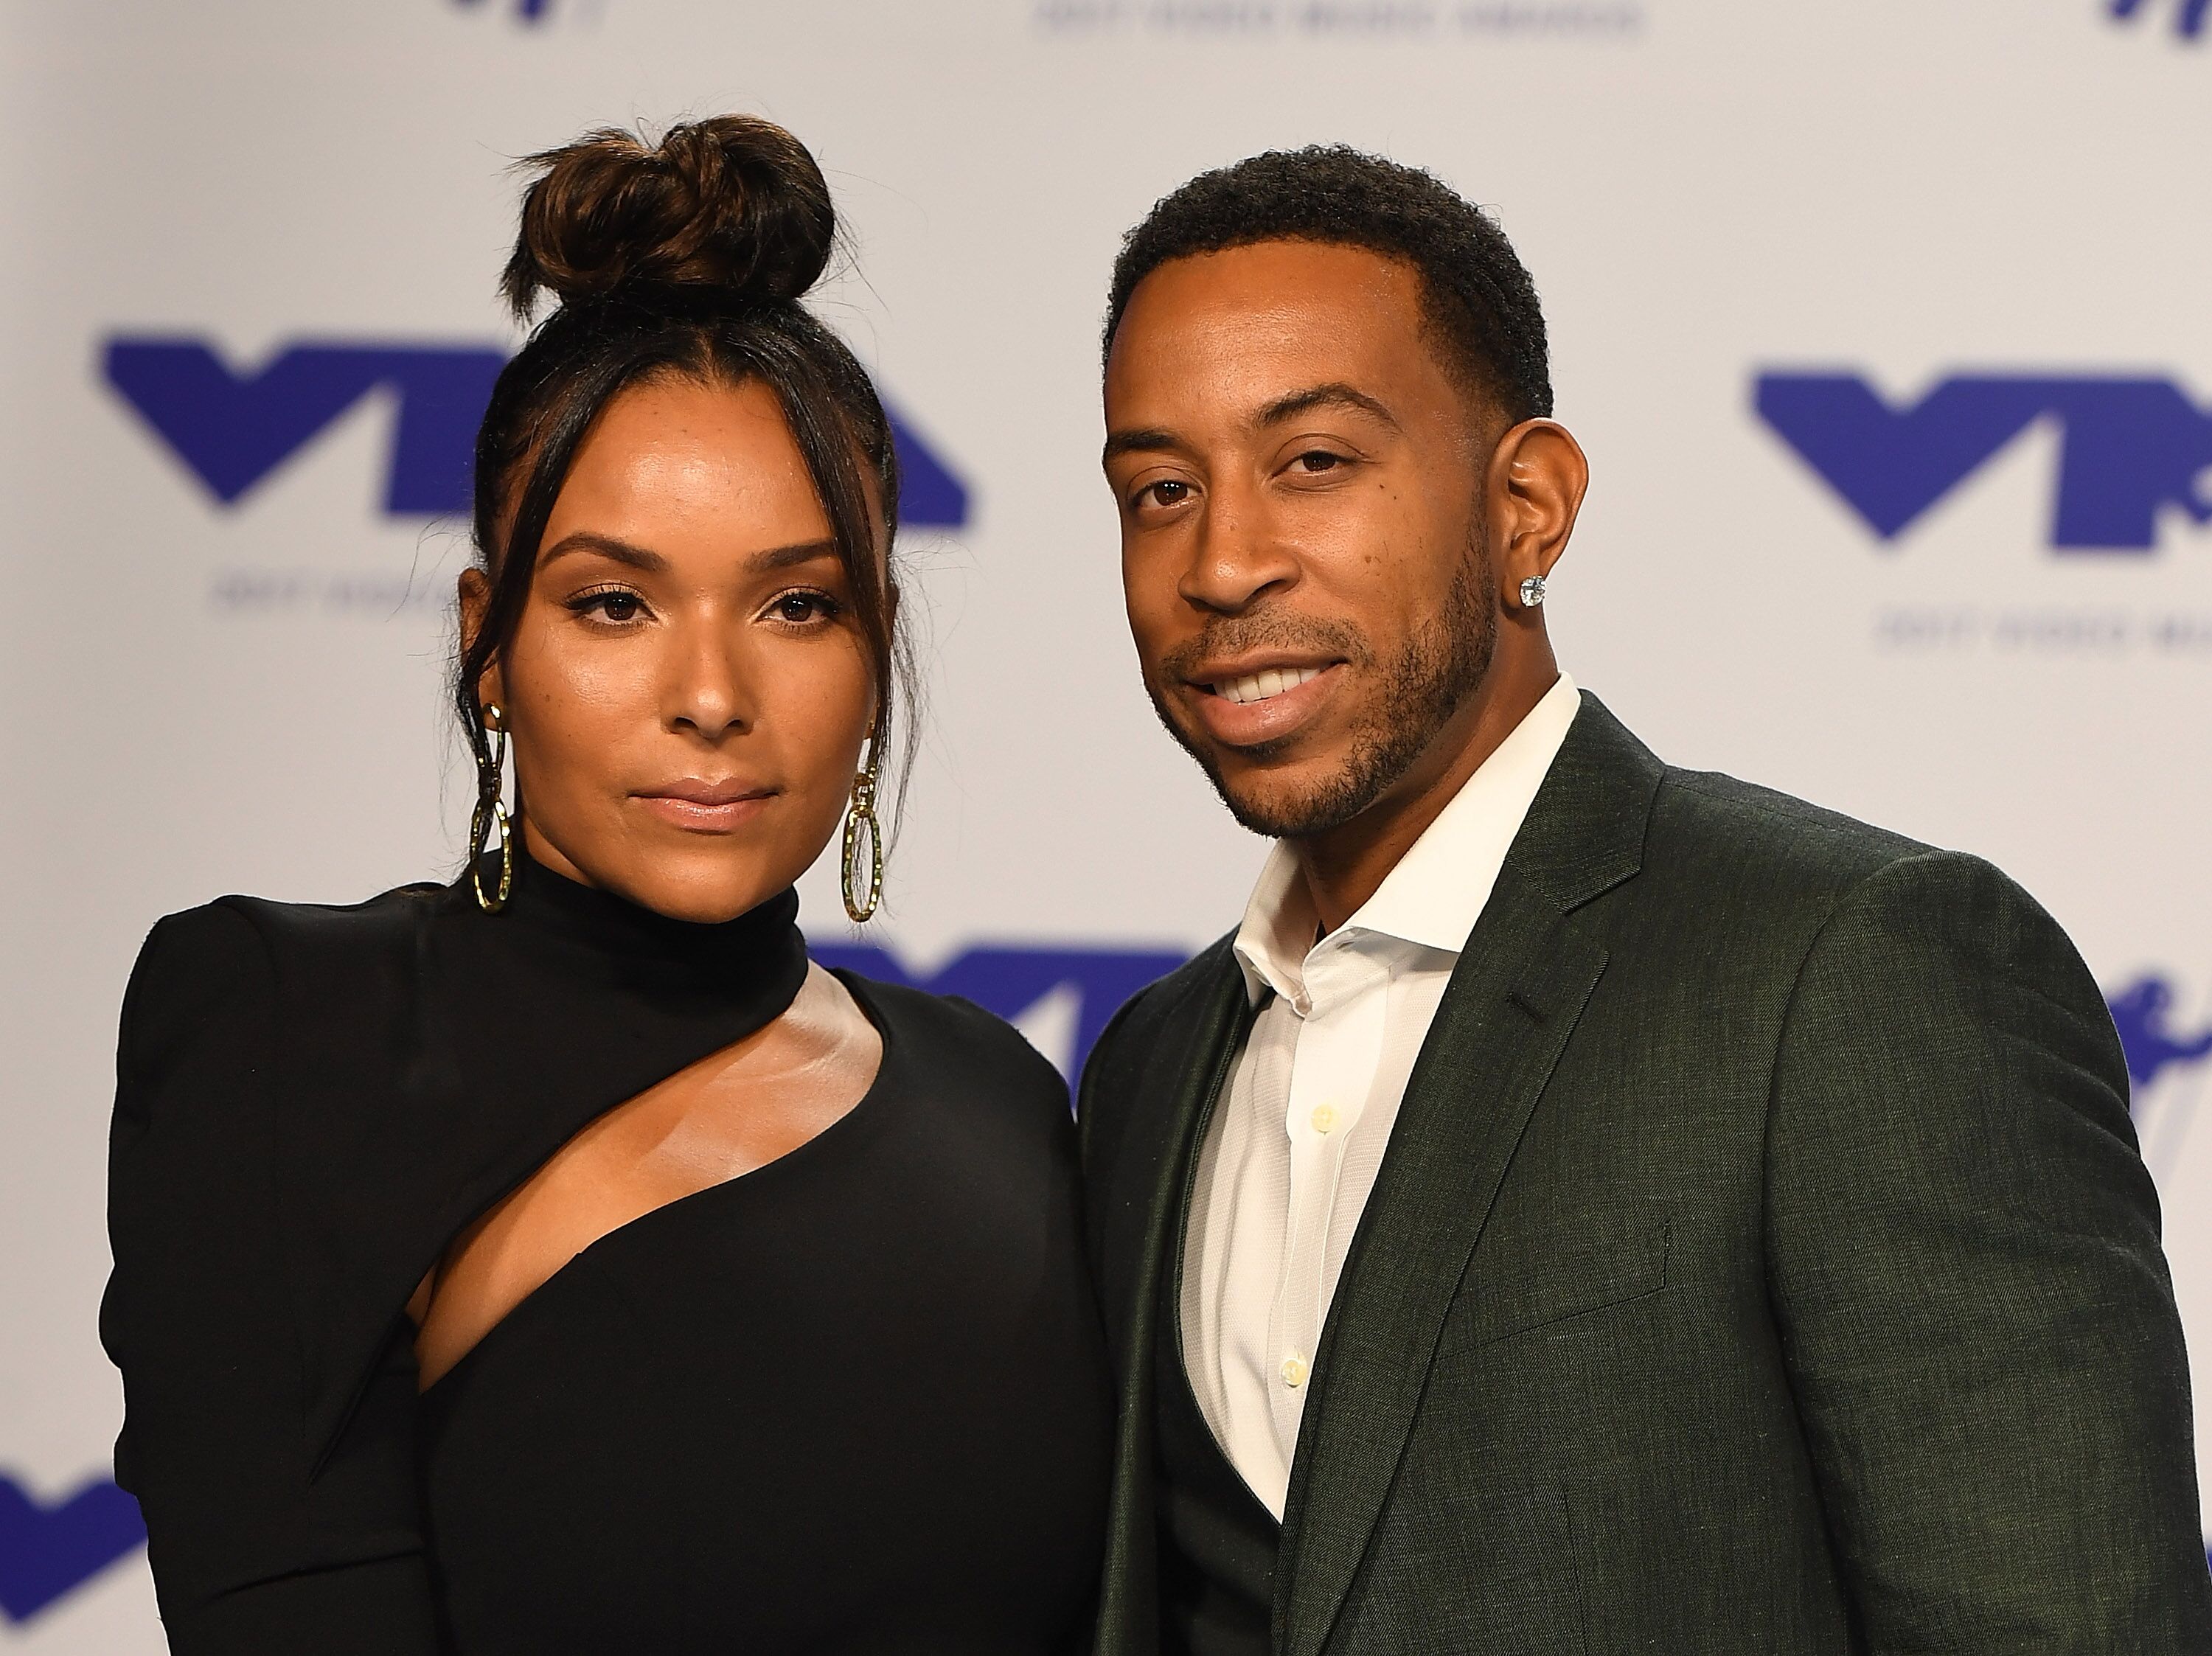 Ludacris and Eudoxie Mbouguiengue at the 2017 MTV Video Music Awards at The Forum on August 27, 2017. | Photo: Getty Images